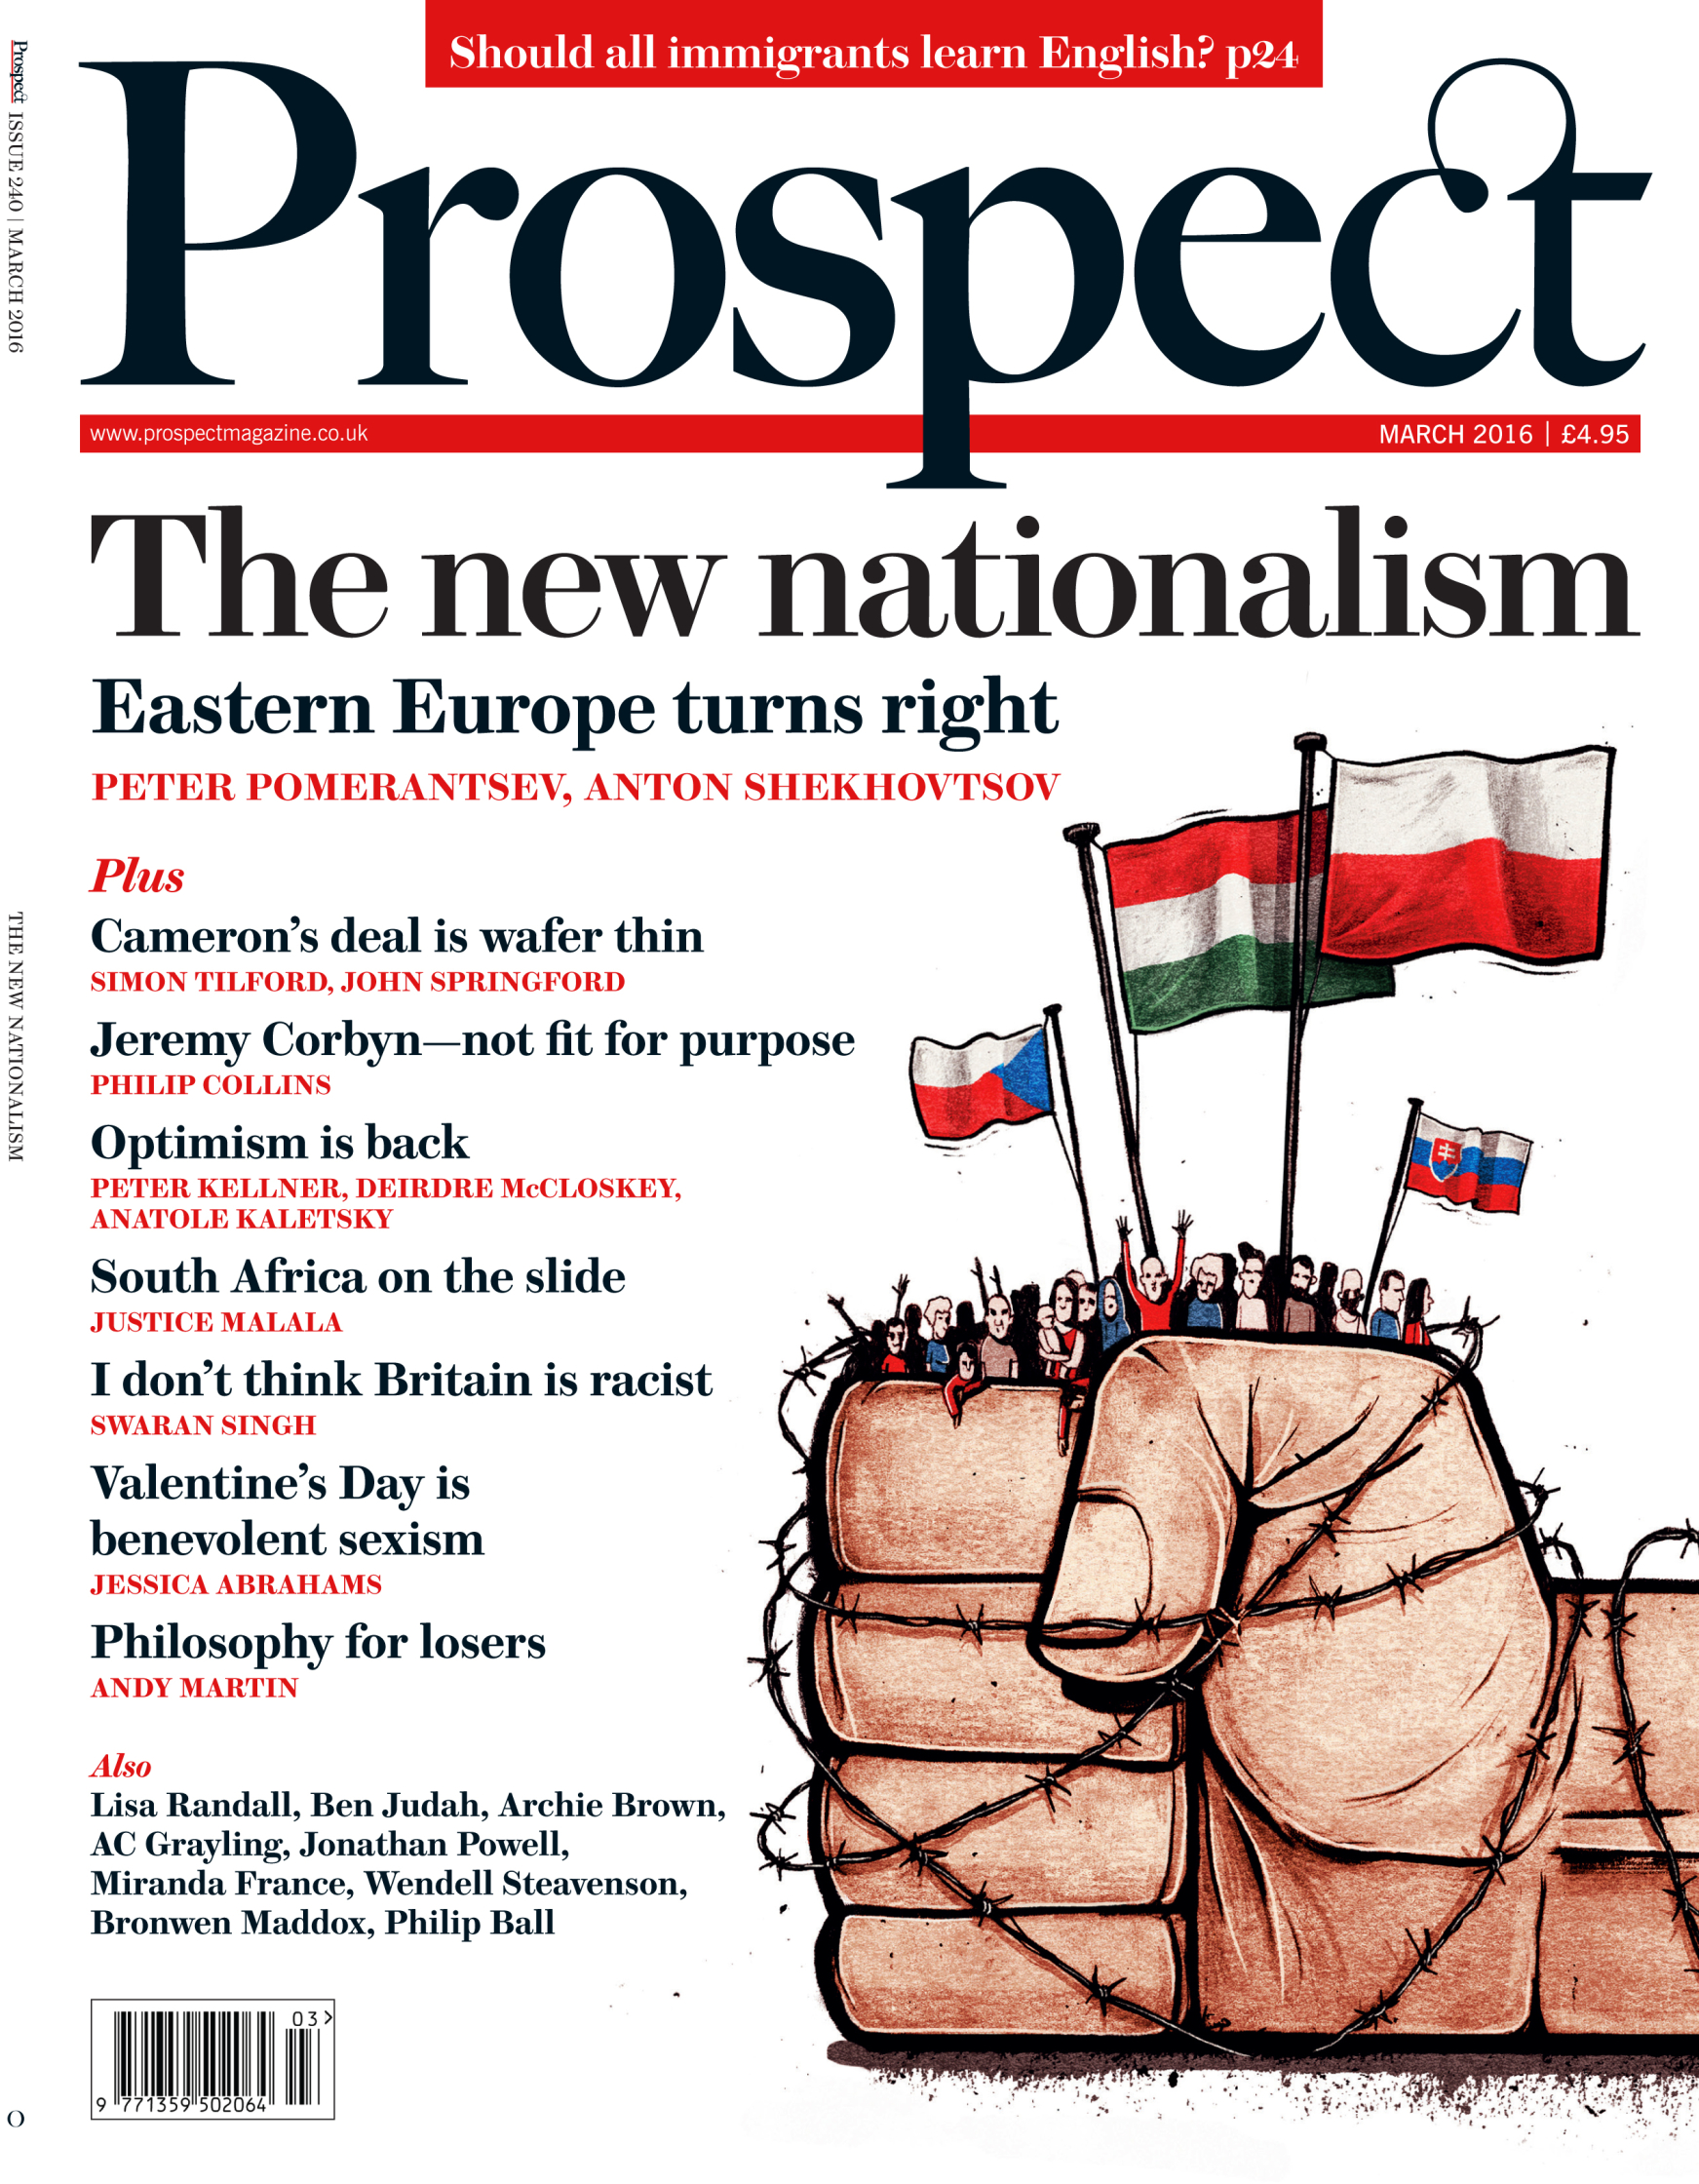 (PAGE 1) Prospect_cover_March2016.jpg